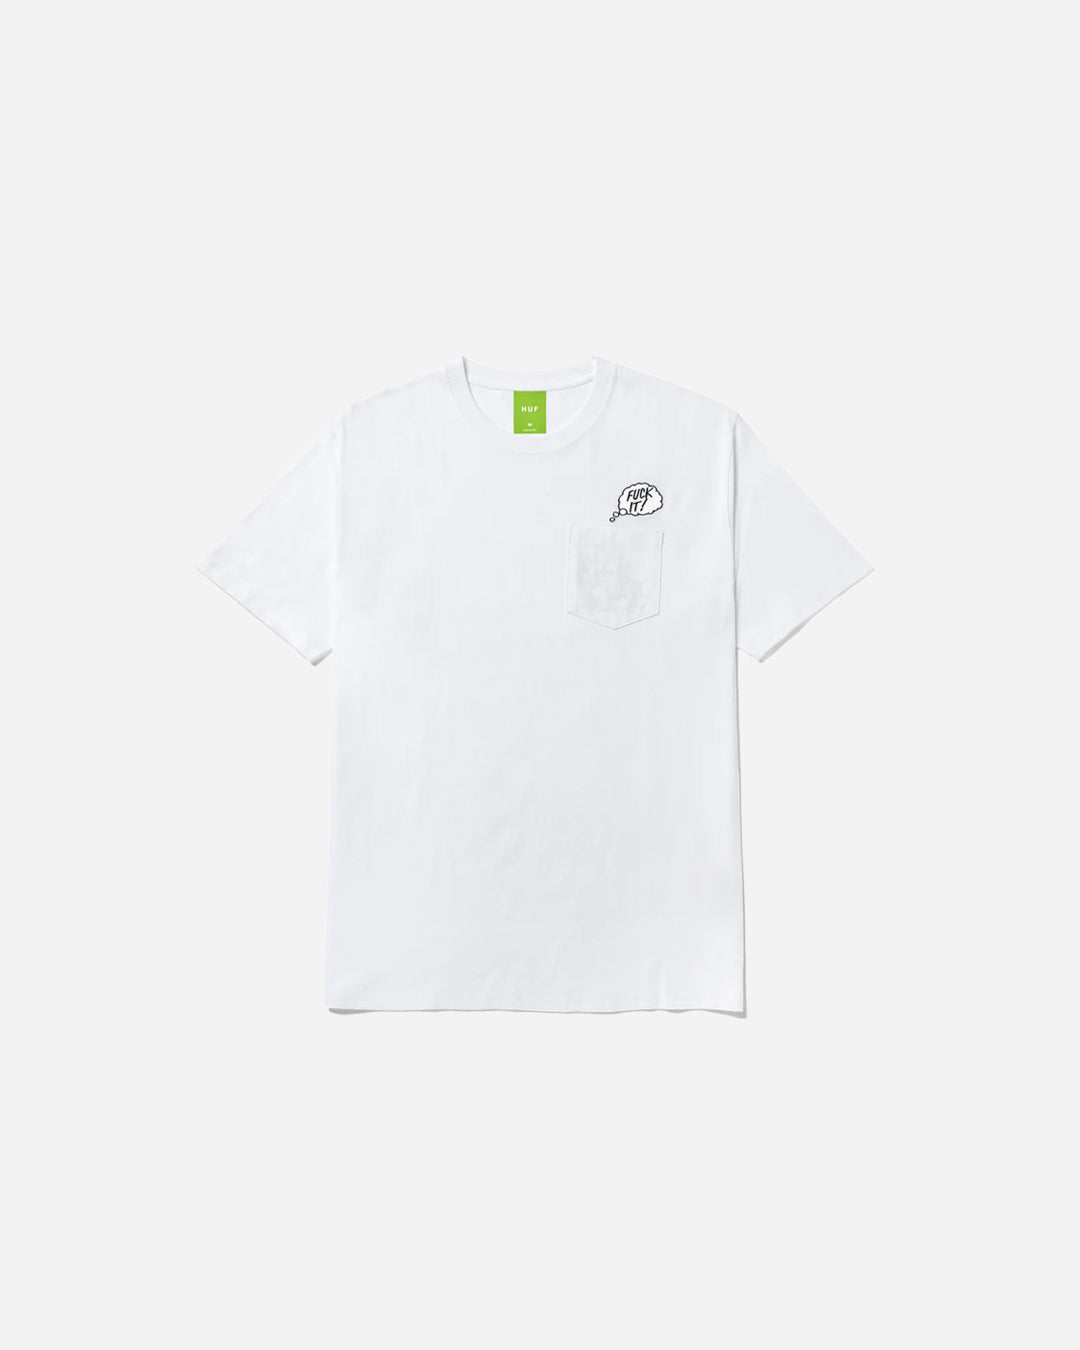 IN THE POCKET S/S TEE